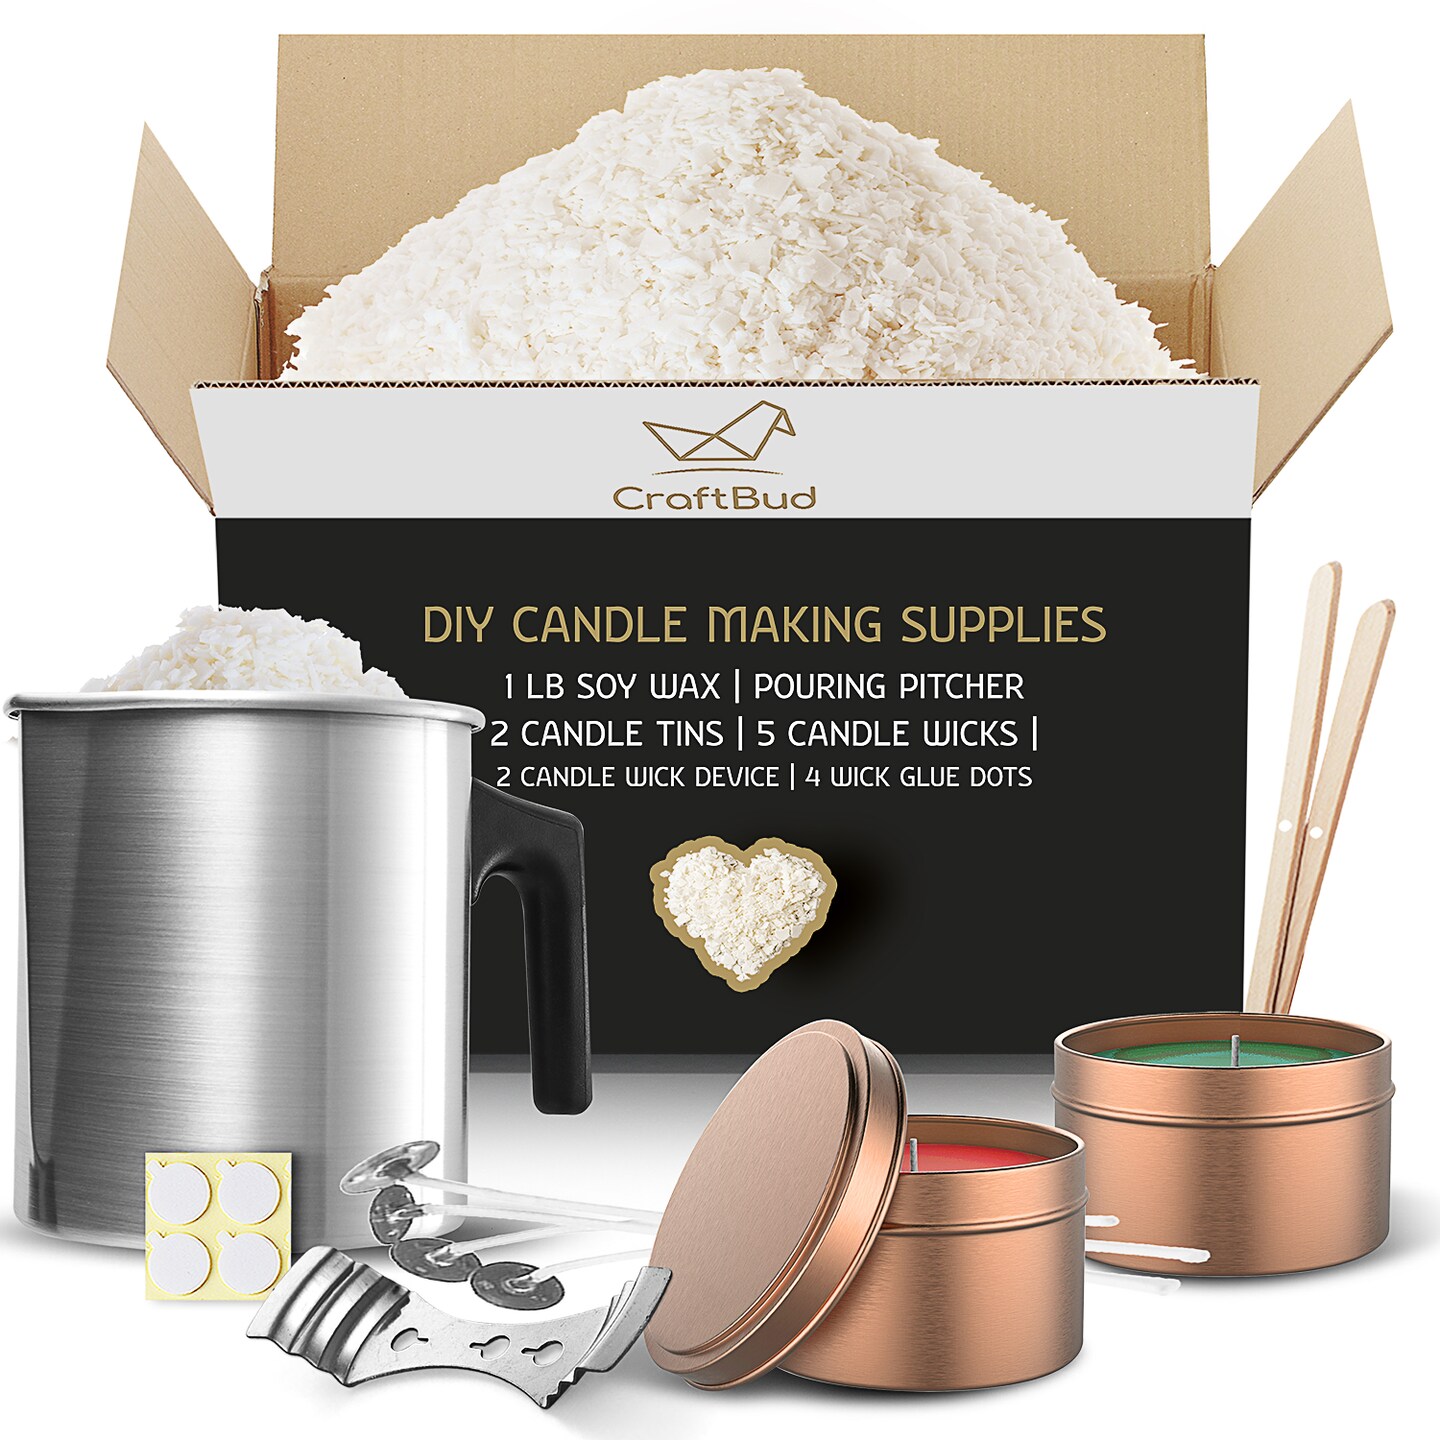 ETUOLIFE Complete Candle Making Kit for Adults Kids,candle Making Supplies Include Soy Wax for Candle Making,Fragrance Oils Candle Wicks